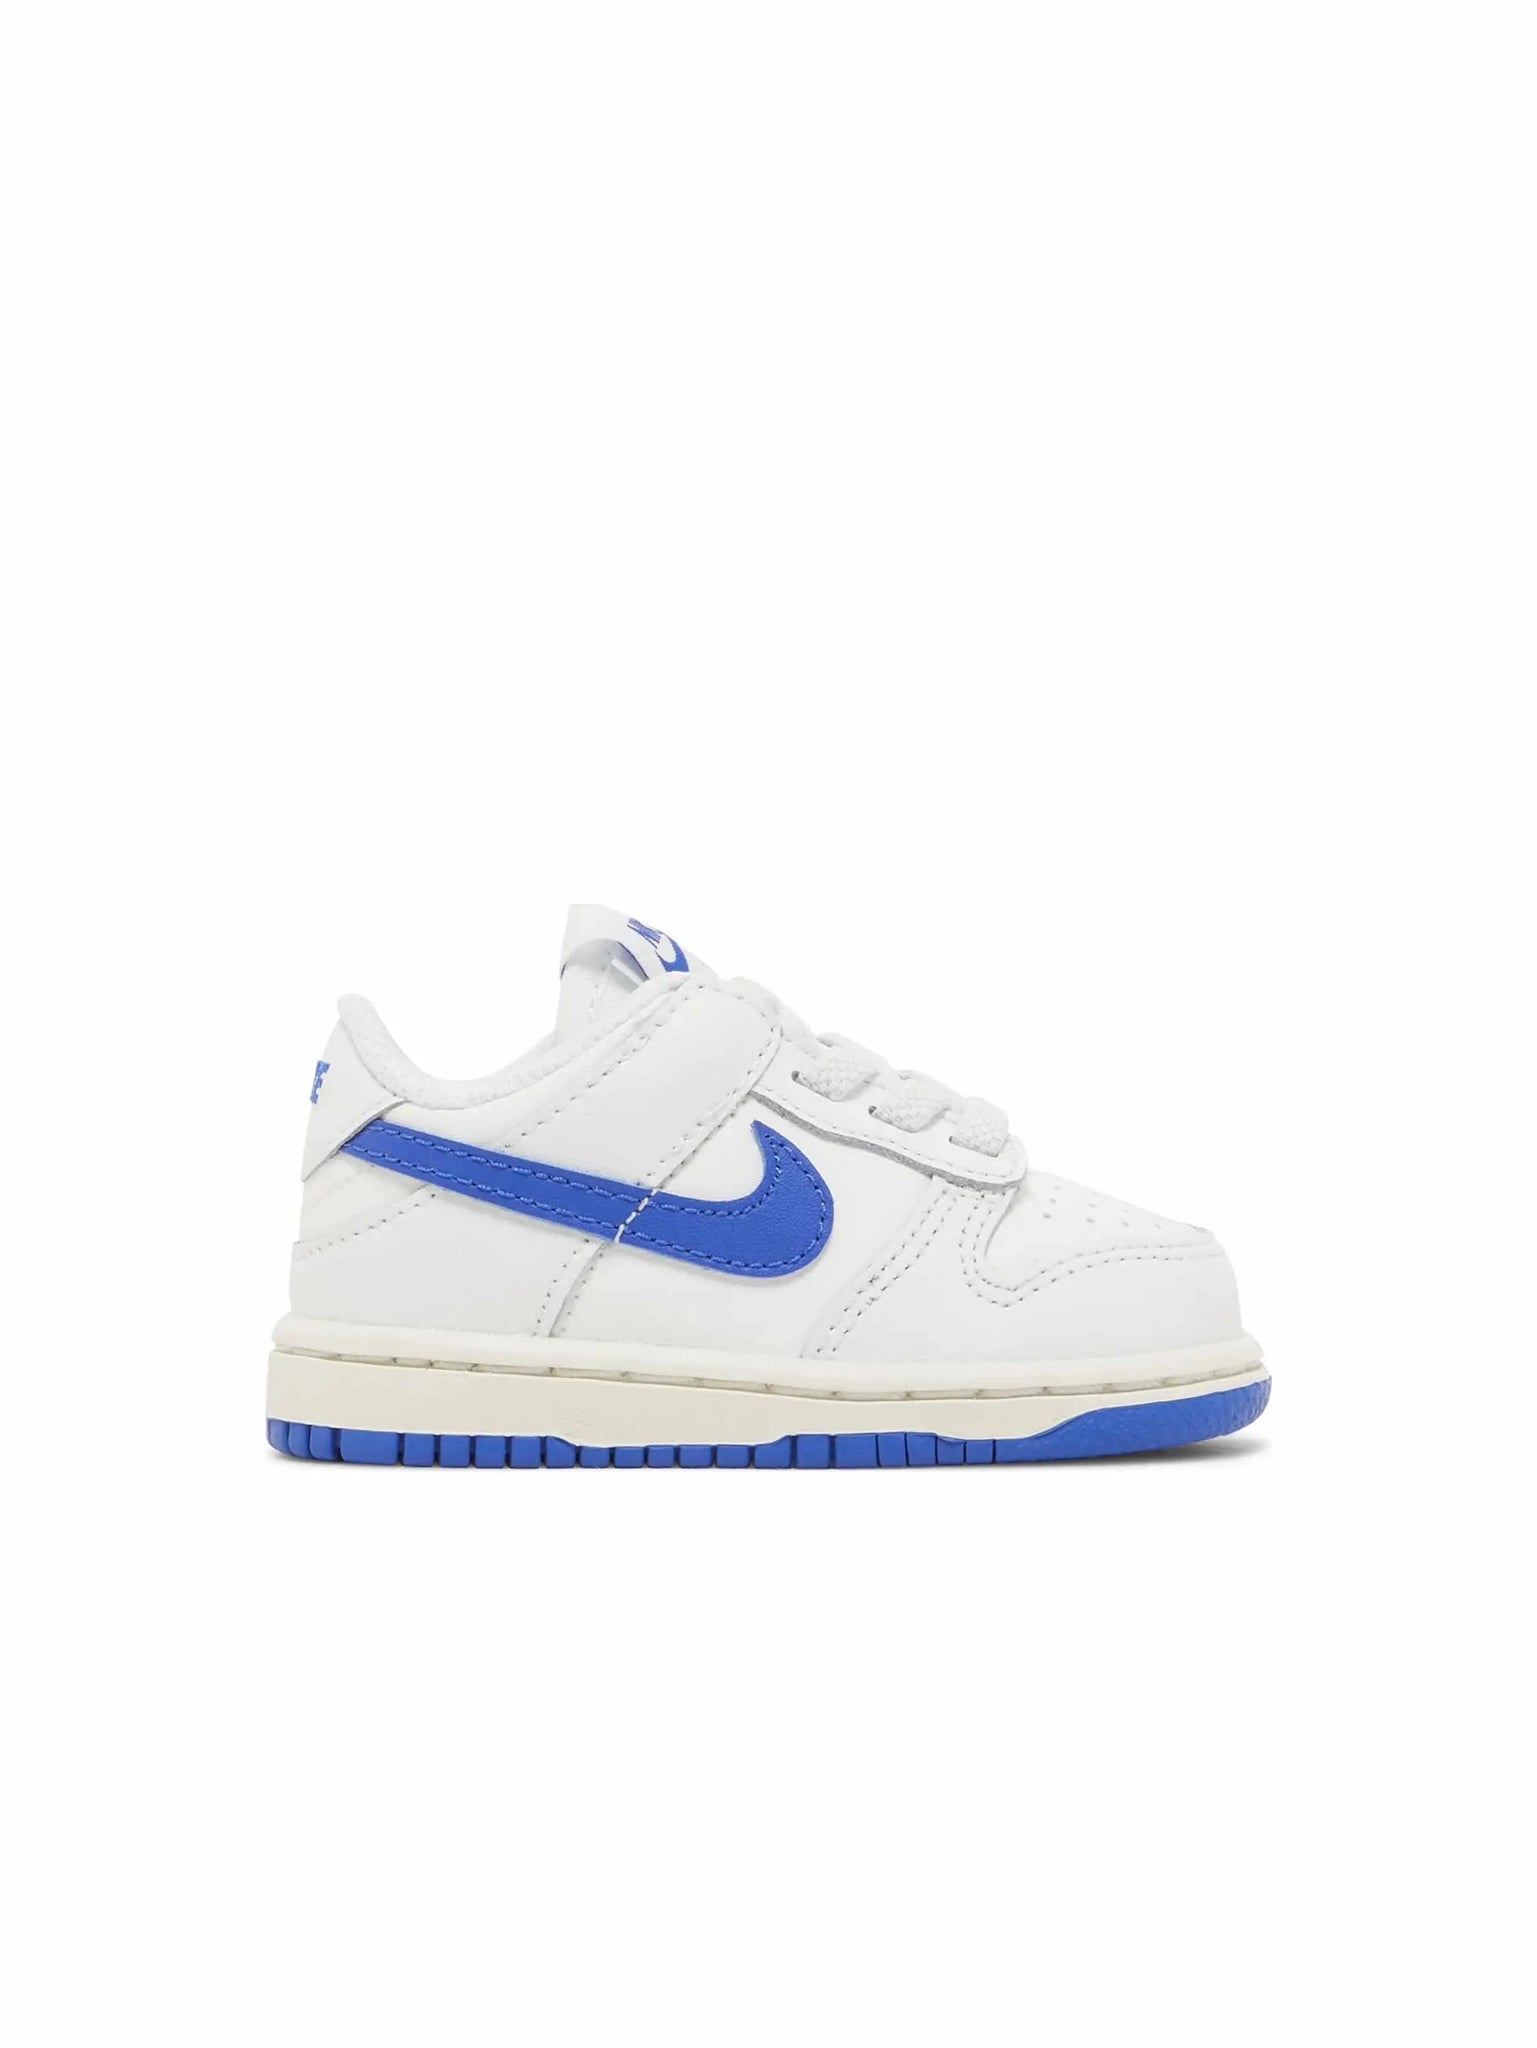 Nike Dunk Low Summit White Hyper Royal (TD) in Auckland, New Zealand - Shop name